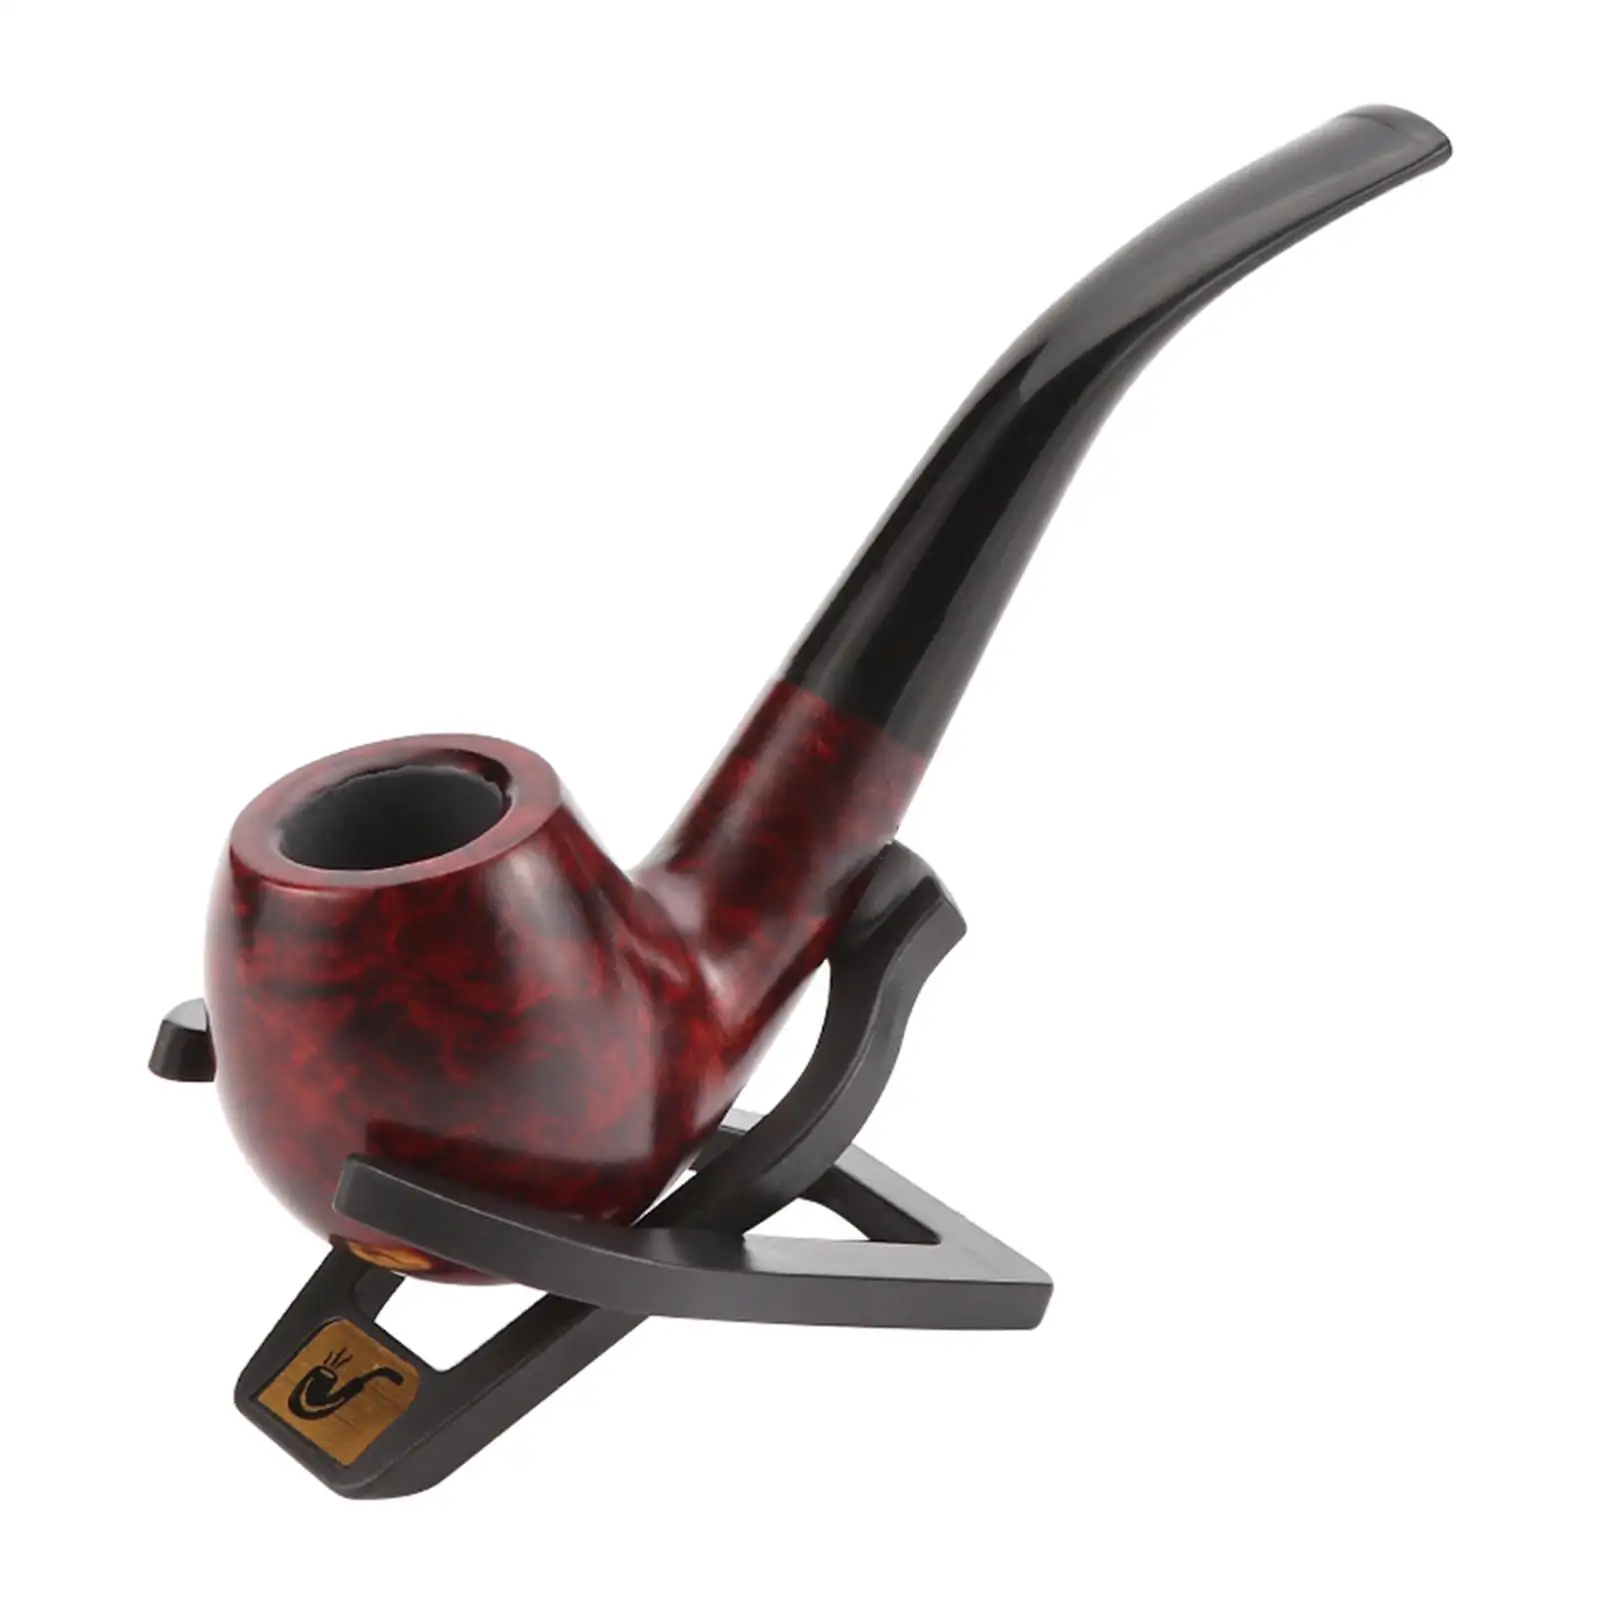 Handy Foldable Smoking Pipe Stand Rack Holder for 1 Tobacco Pipe